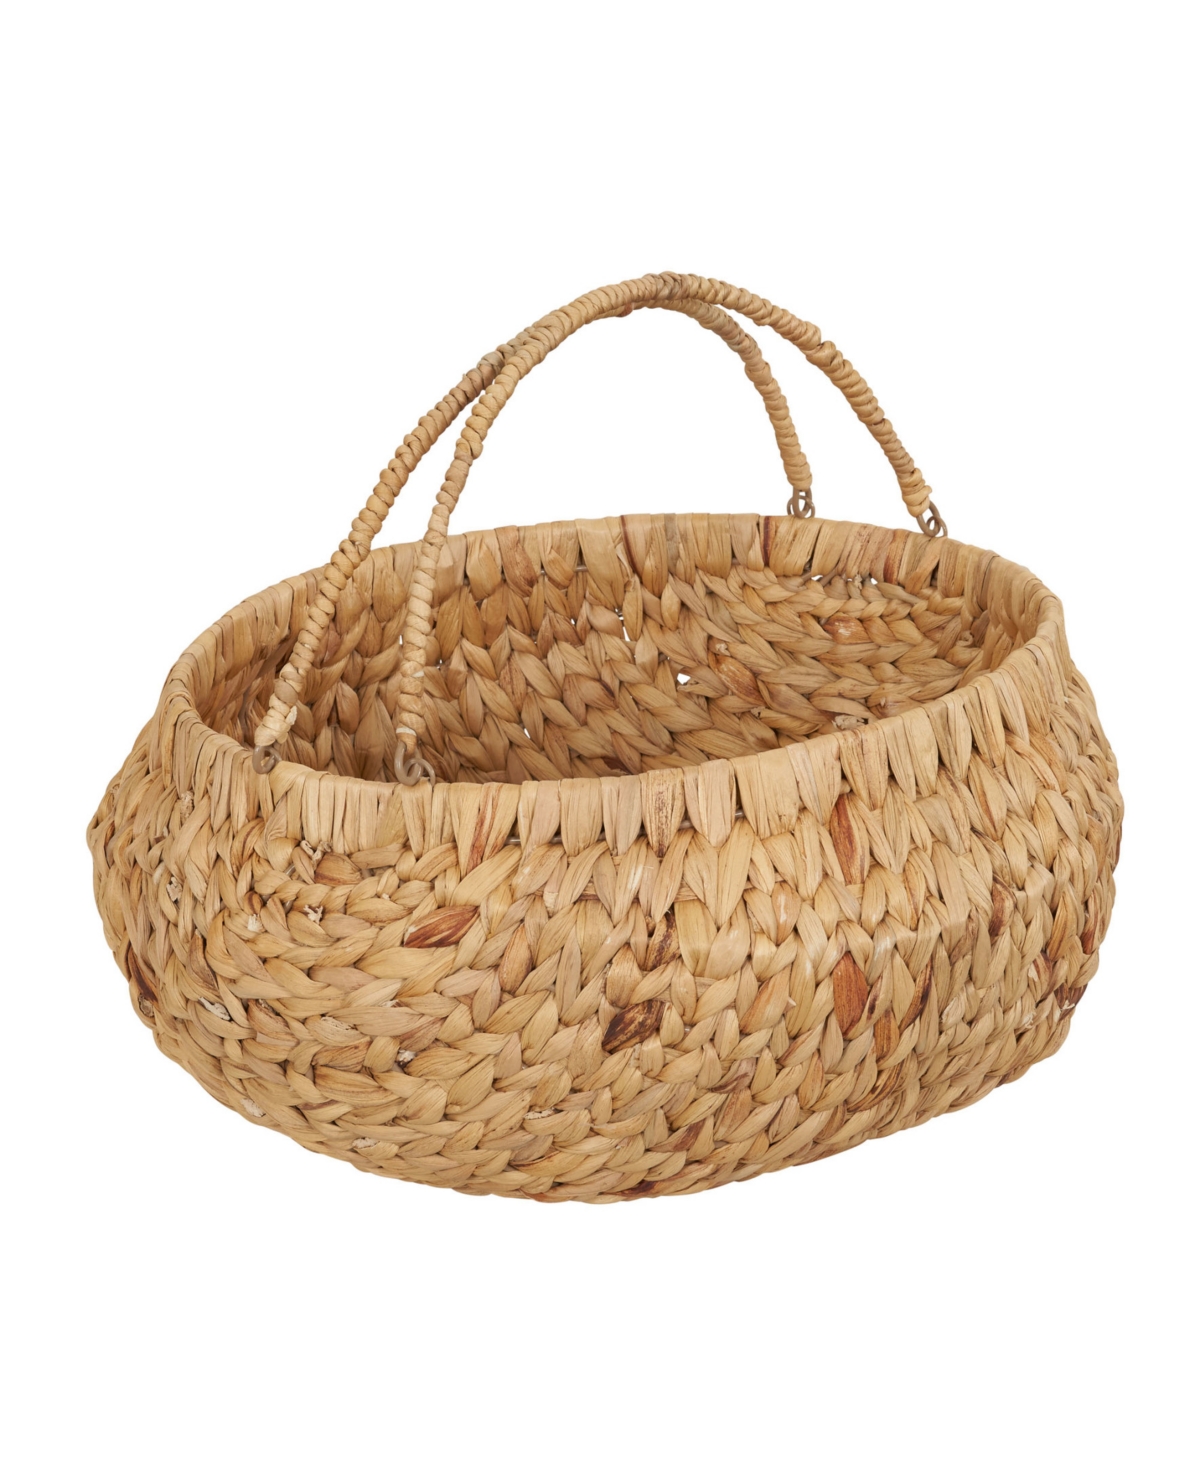 Round Woven Basket with Handles - Natural